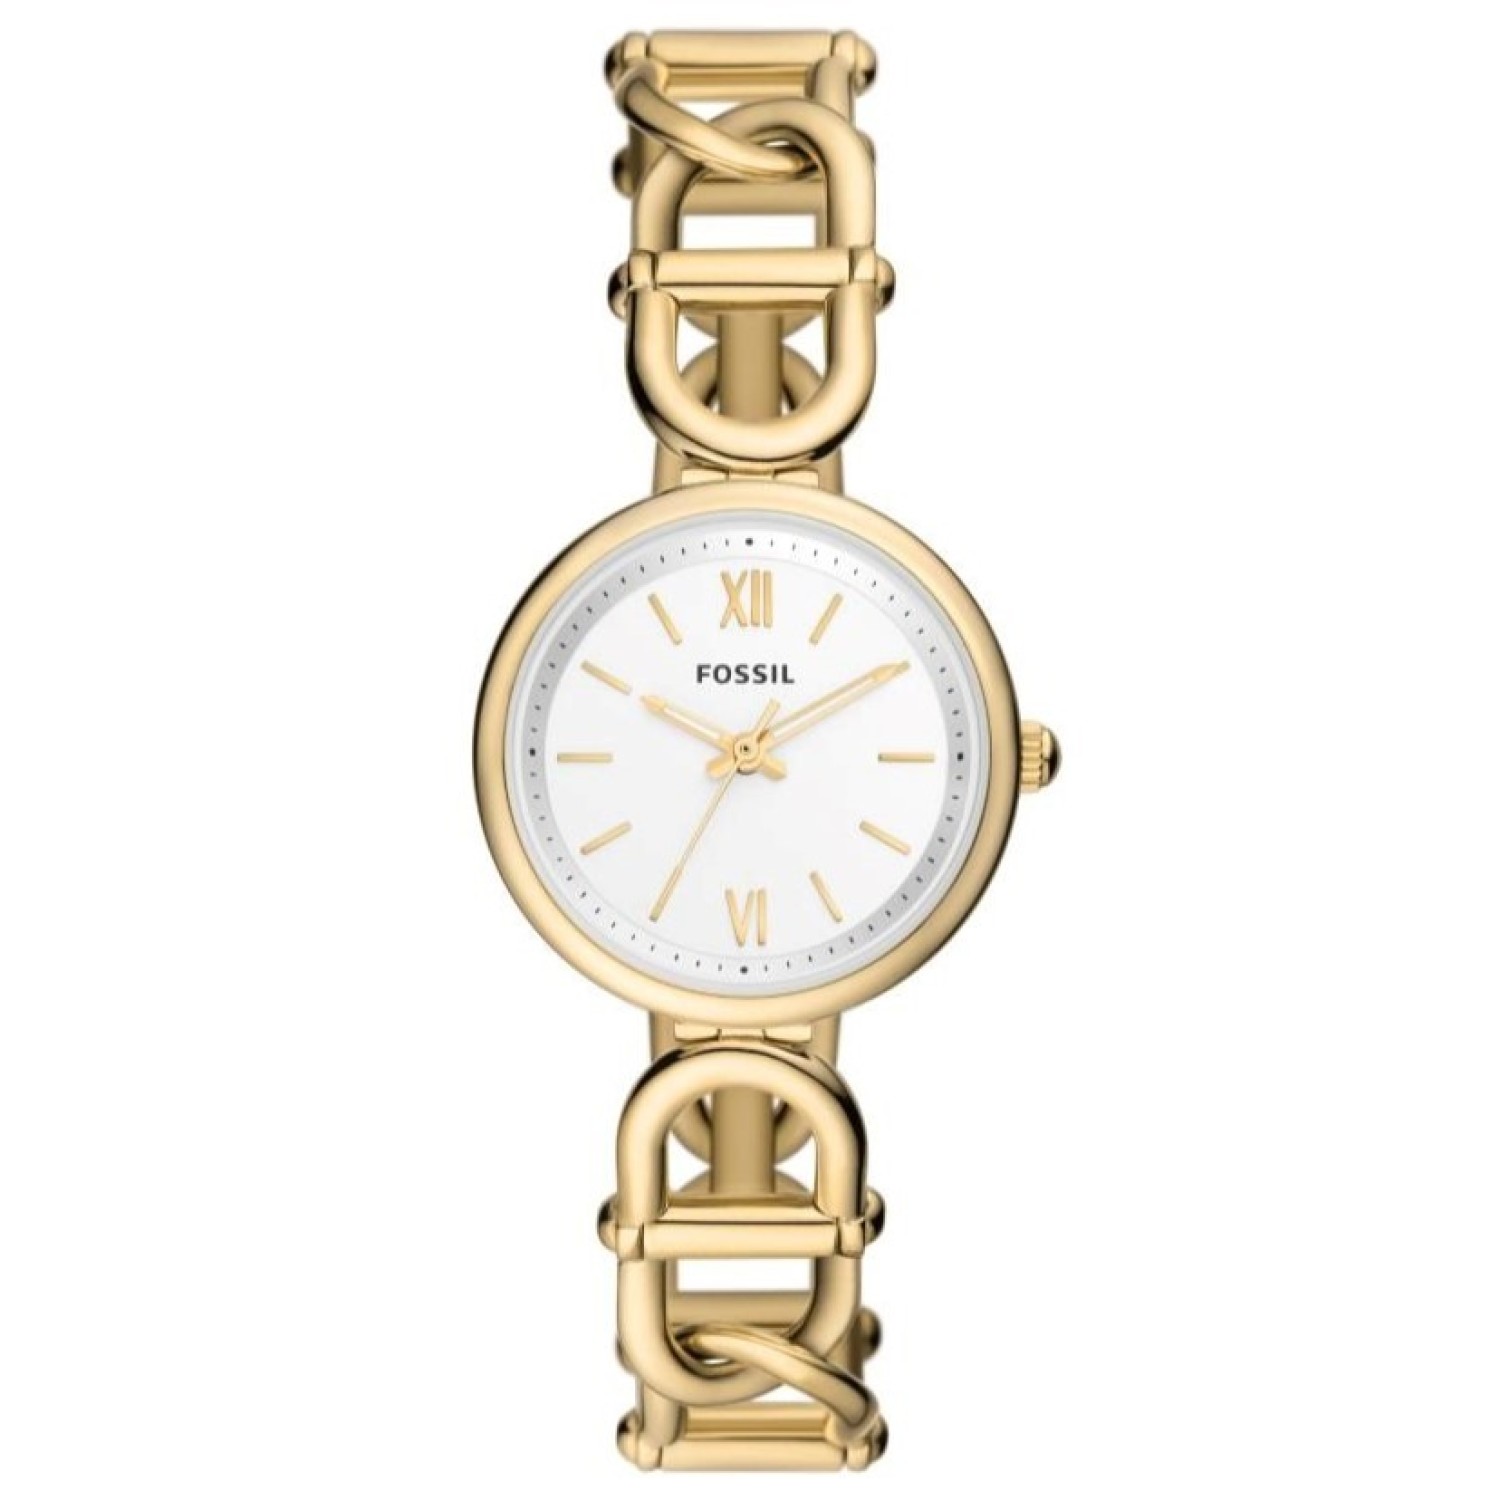 ES5272 Fossil Carlie Three-Hand Gold-Tone Stainless Steel Watch 